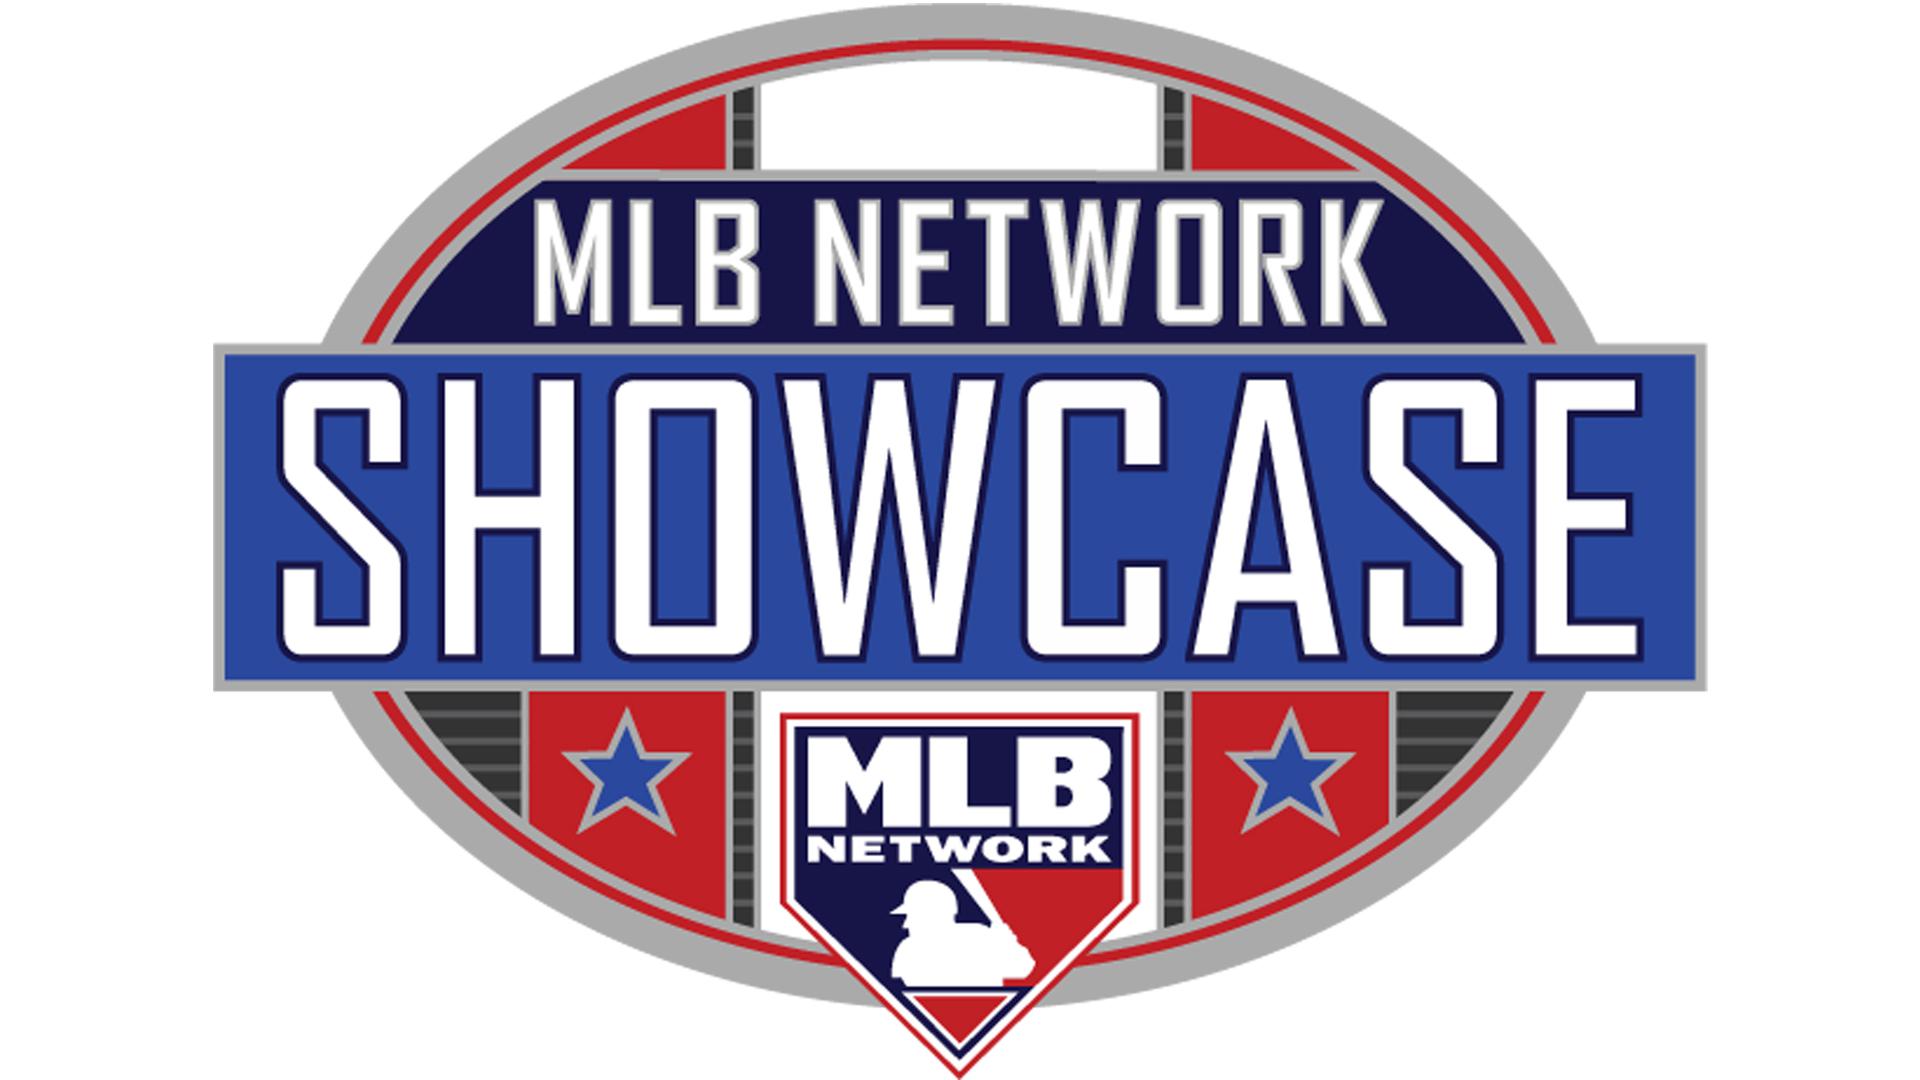 MLB Network Showcase red, white and blue oval logo